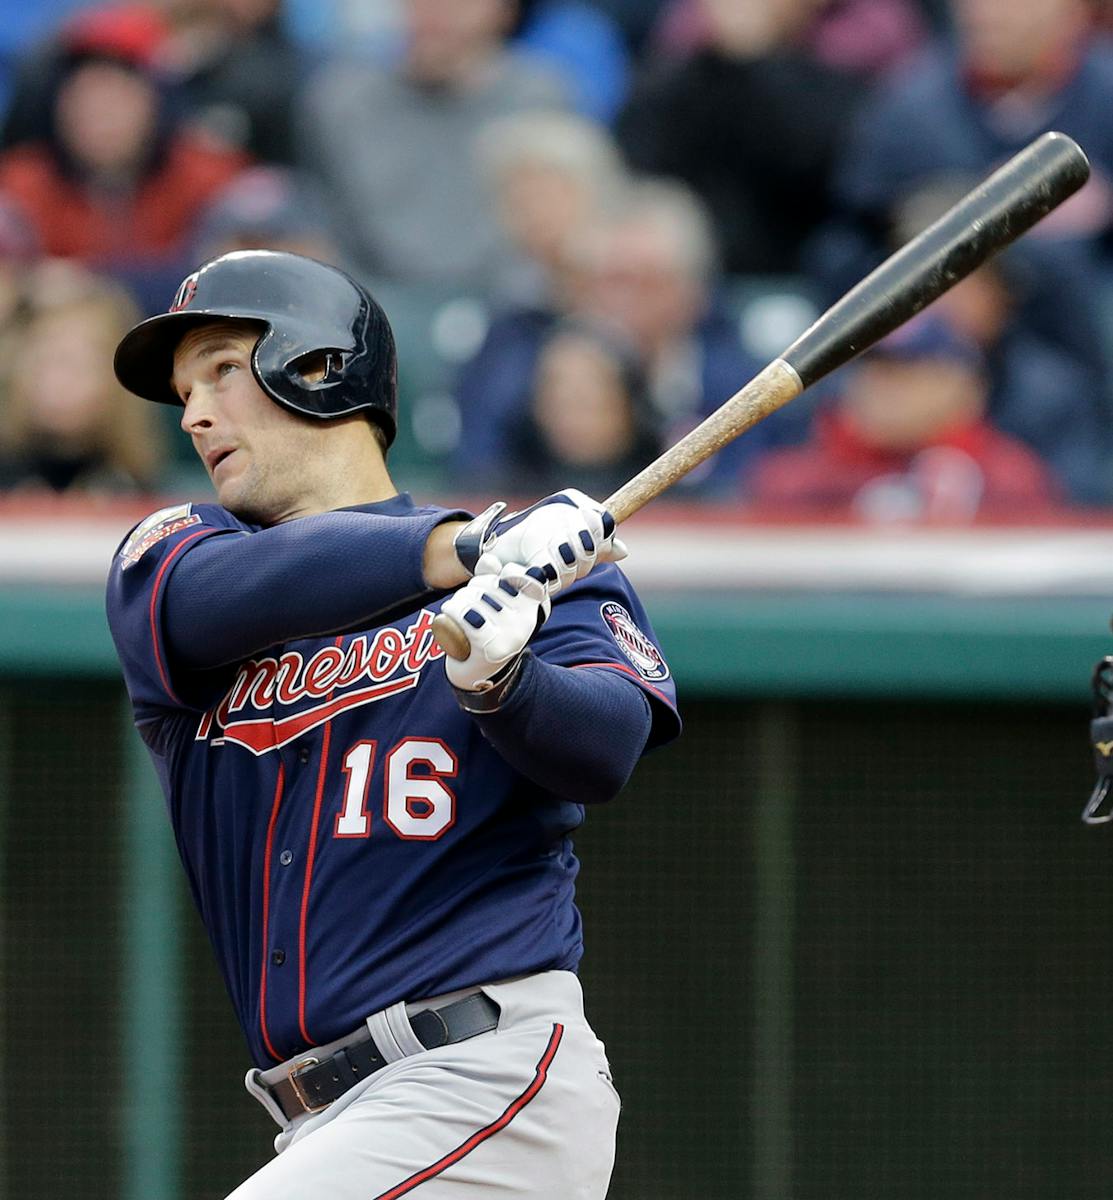 Left fielder Josh Willingham has a small broken bone in his left wrist, but the Twins hope their cleanup hitter can return in another week or so.